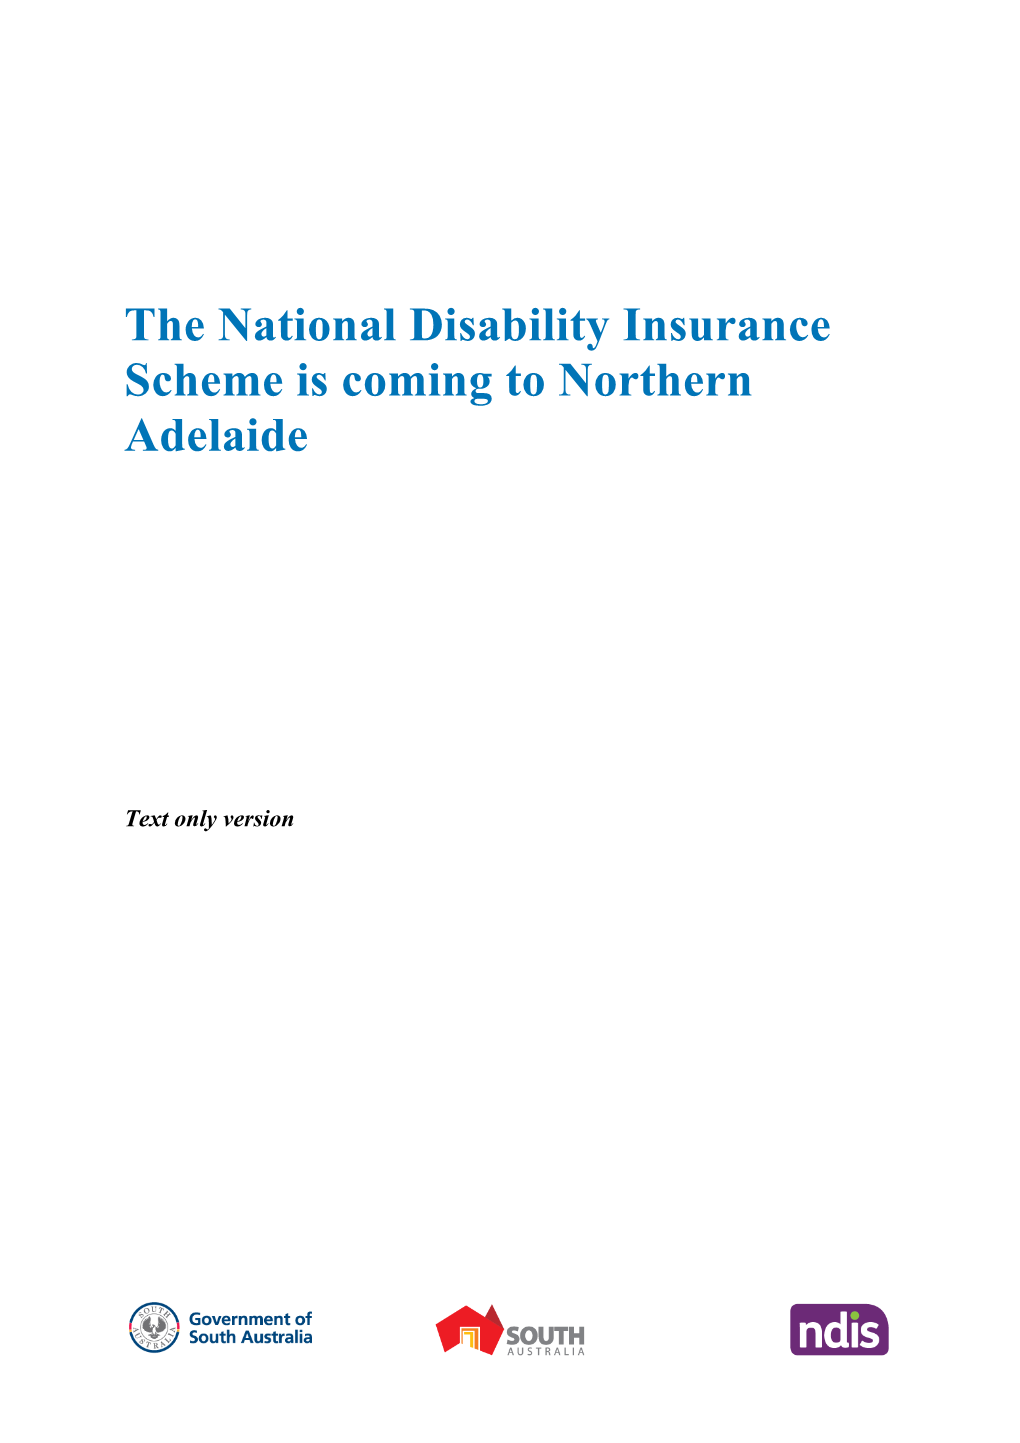 The National Disability Insurance Scheme Is Coming to Northern Adelaide